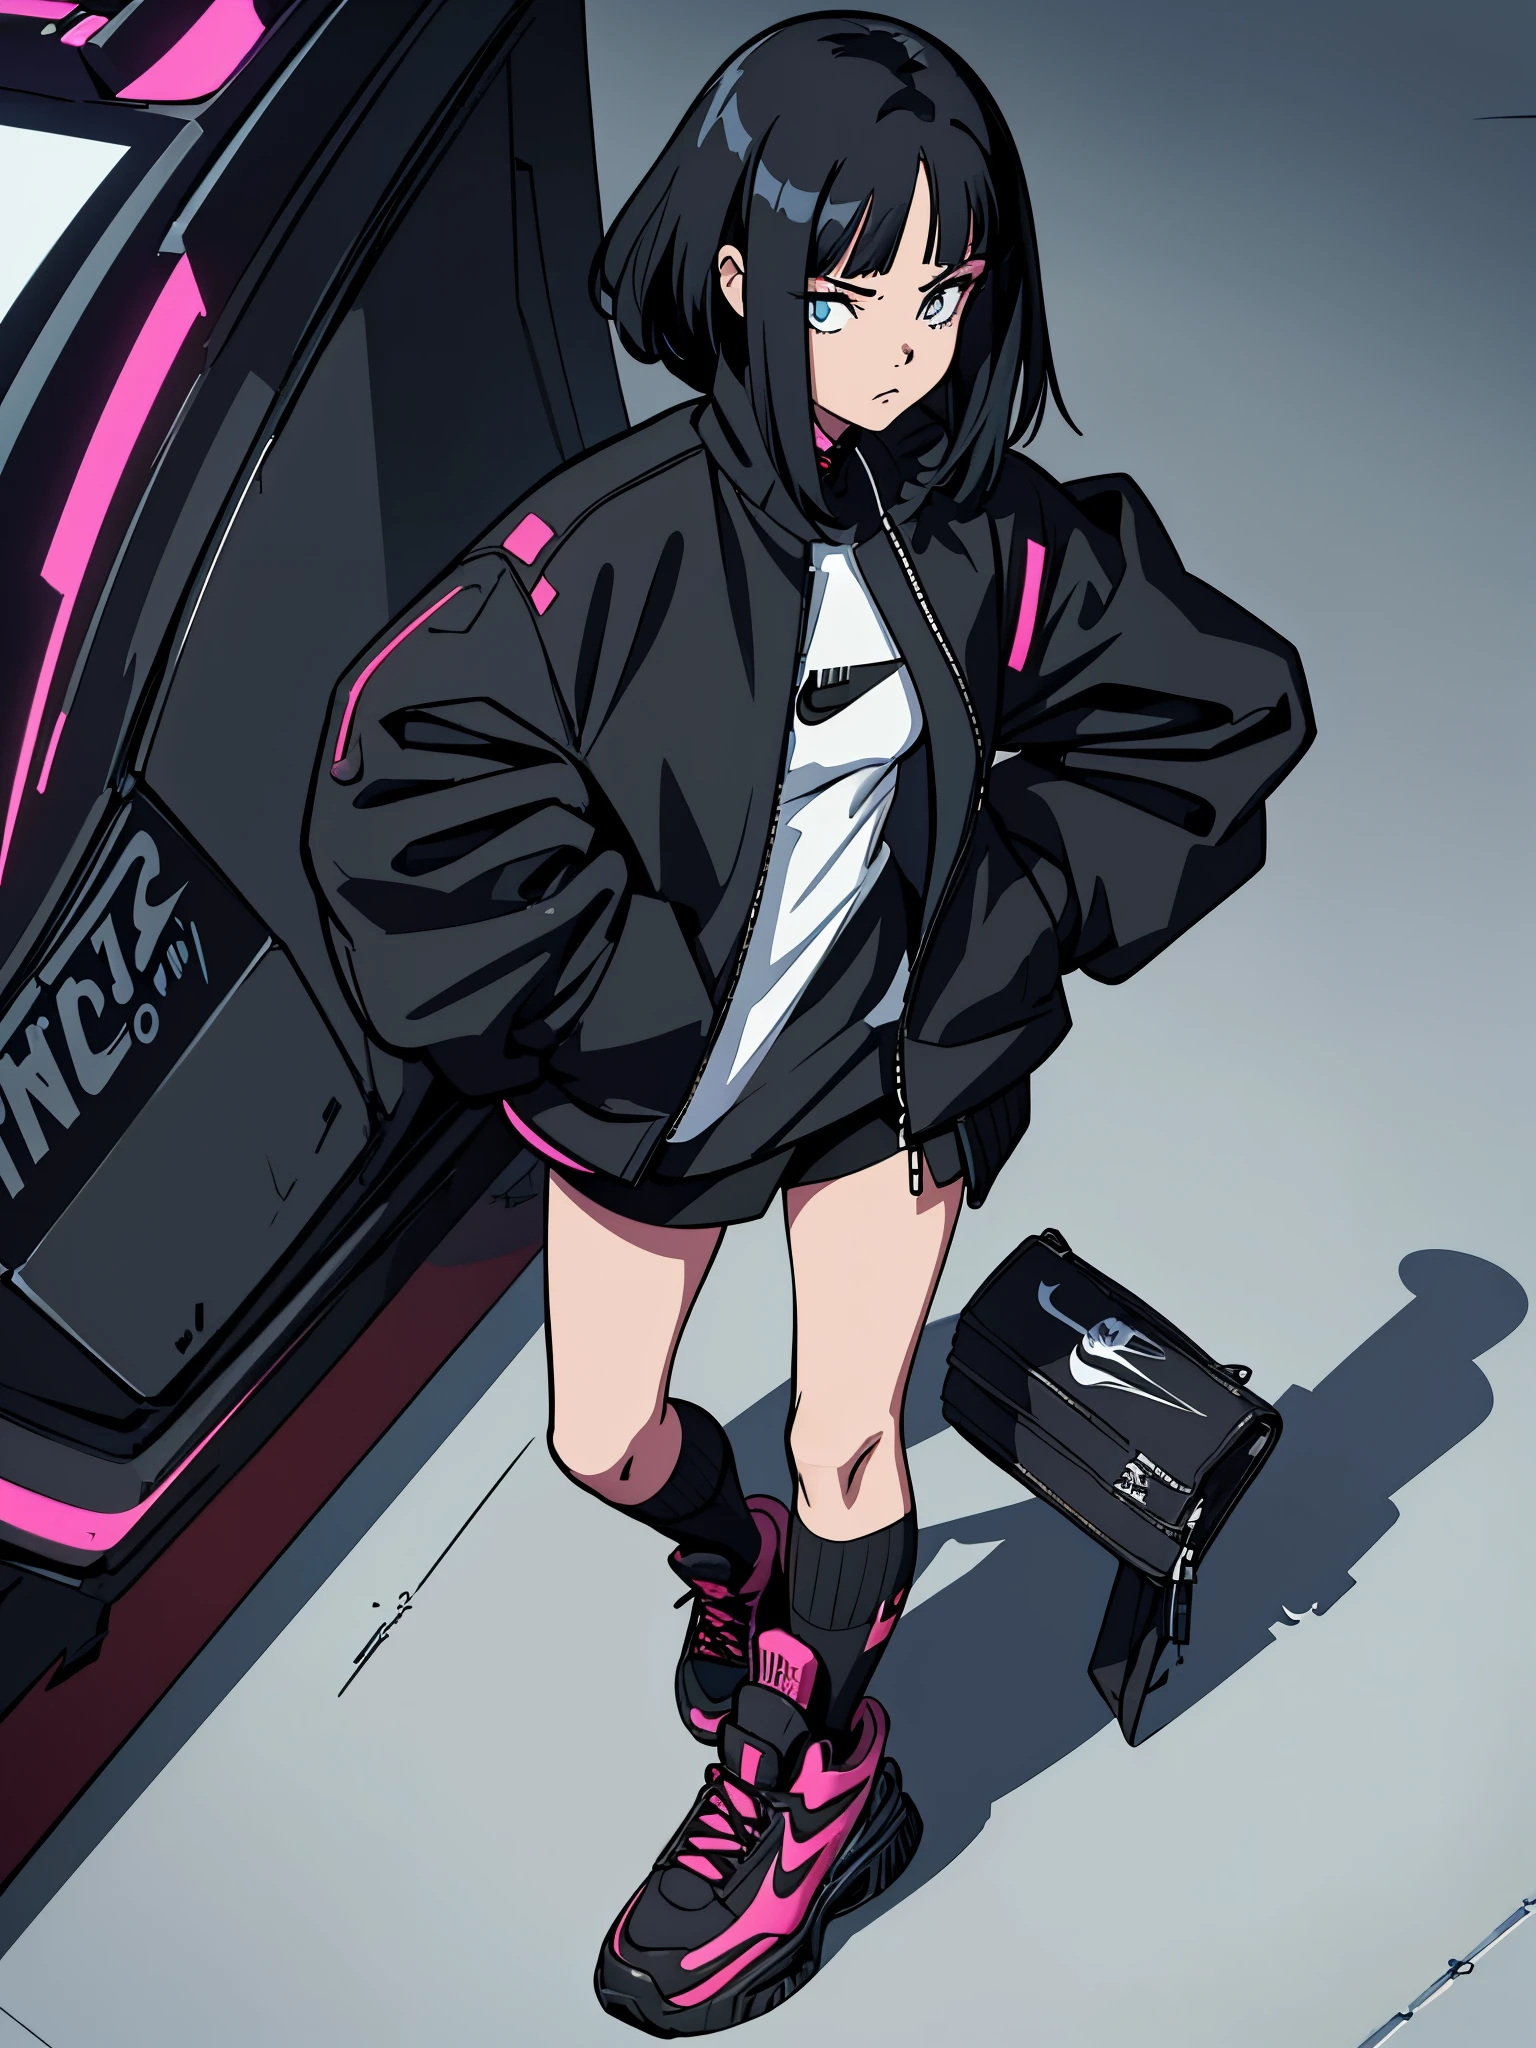 digital art drawing, illustration of (cyborg girl, wearing a black oversized jacket, nike sneakers, cyberpunk), anime drawing/art, bold linework, illustration, digital art, masterpiece, flat illustration, no shadows, black and white, 8k resolution, high detail, vector art, only anime